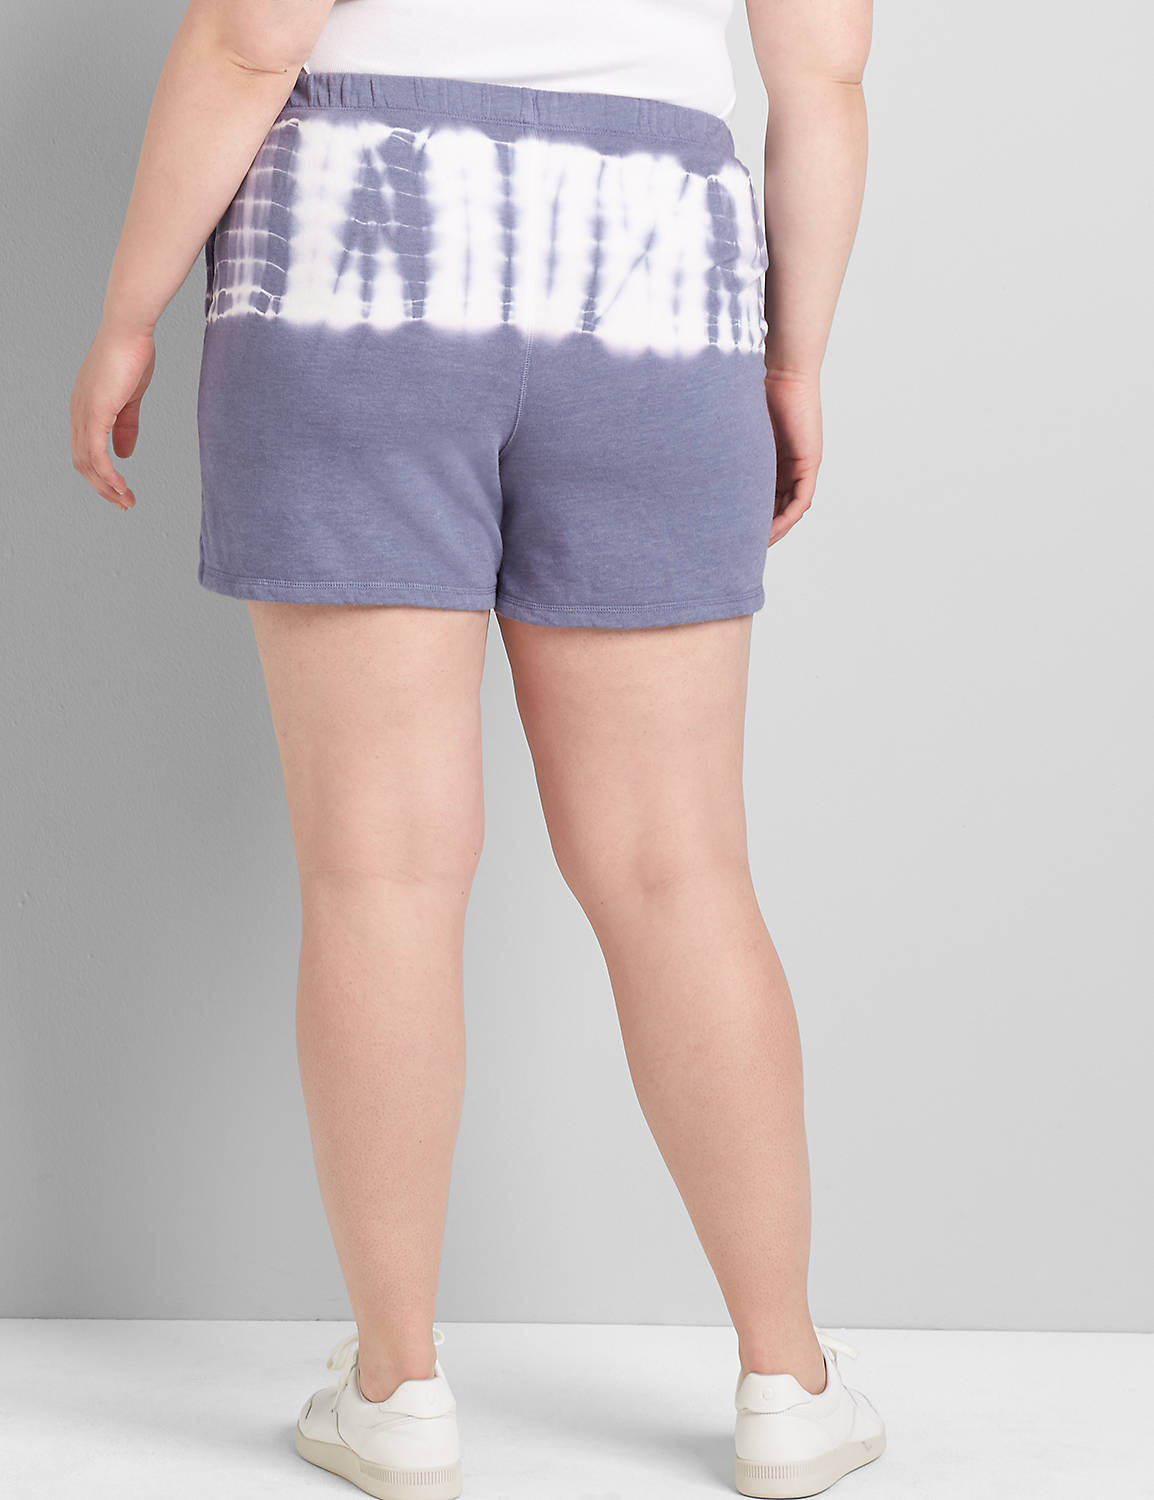 LIVI French Terry Short Product Image 2